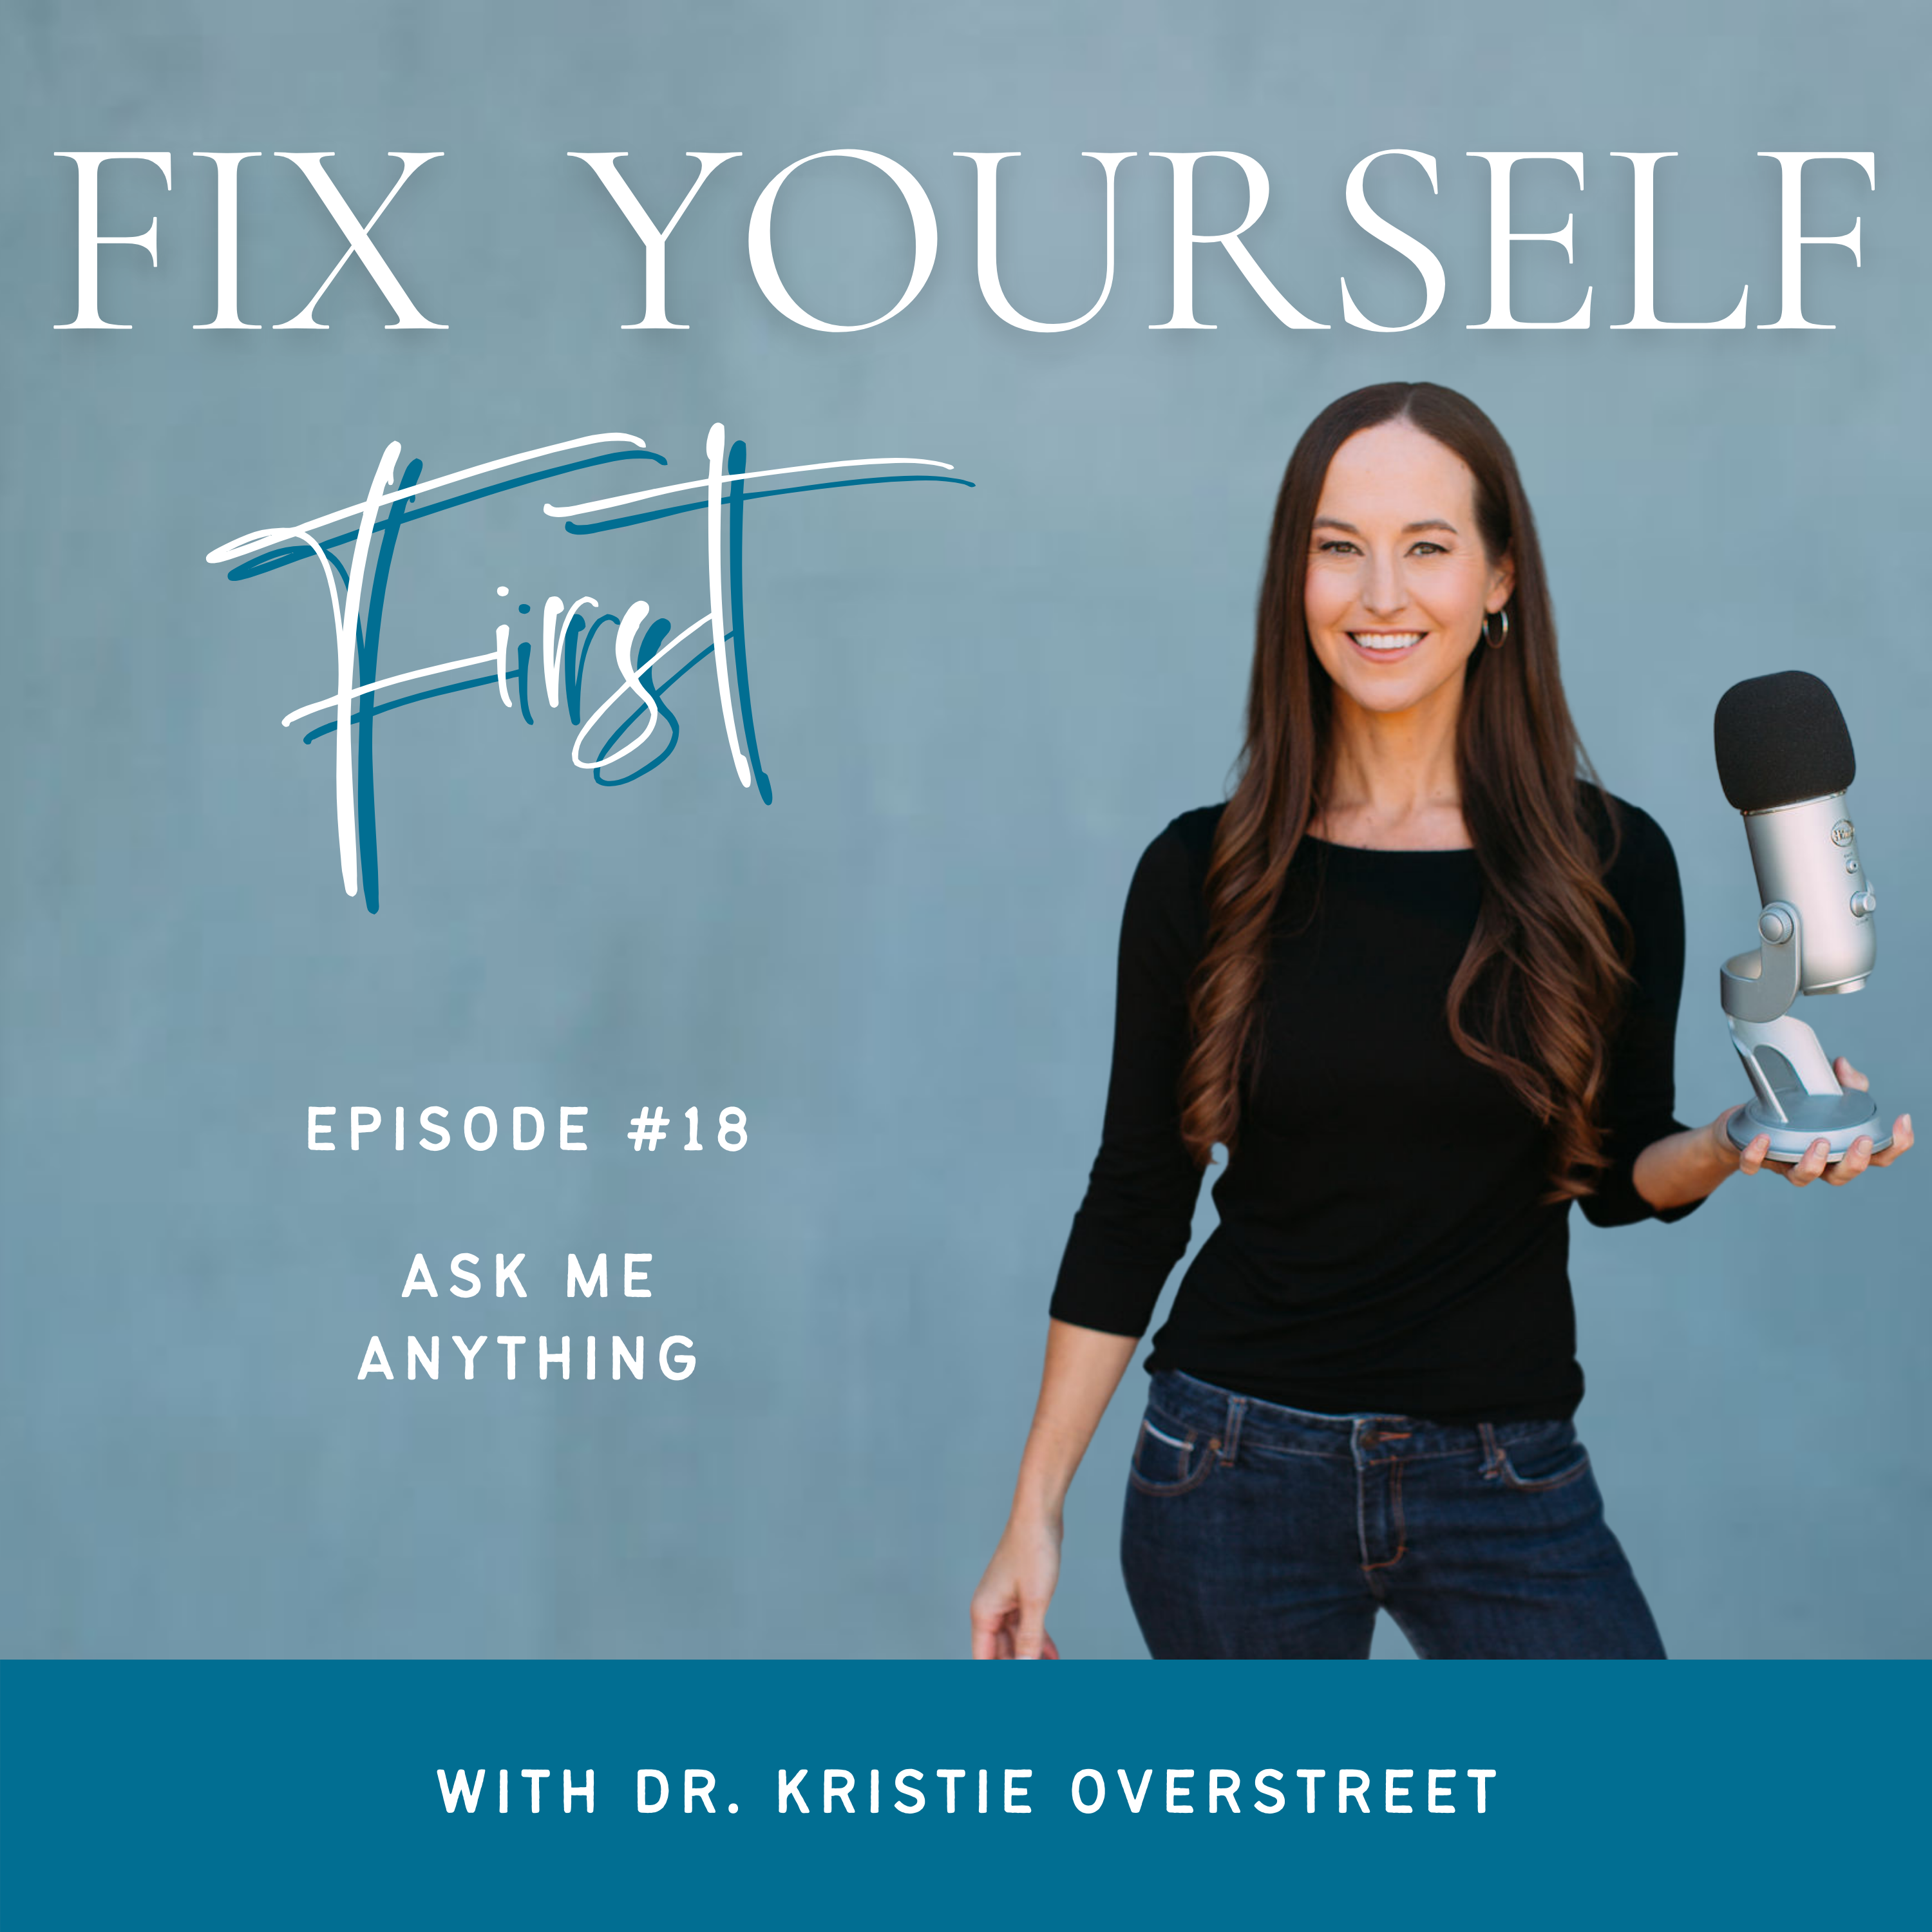 Fix Yourself First - Episode 18